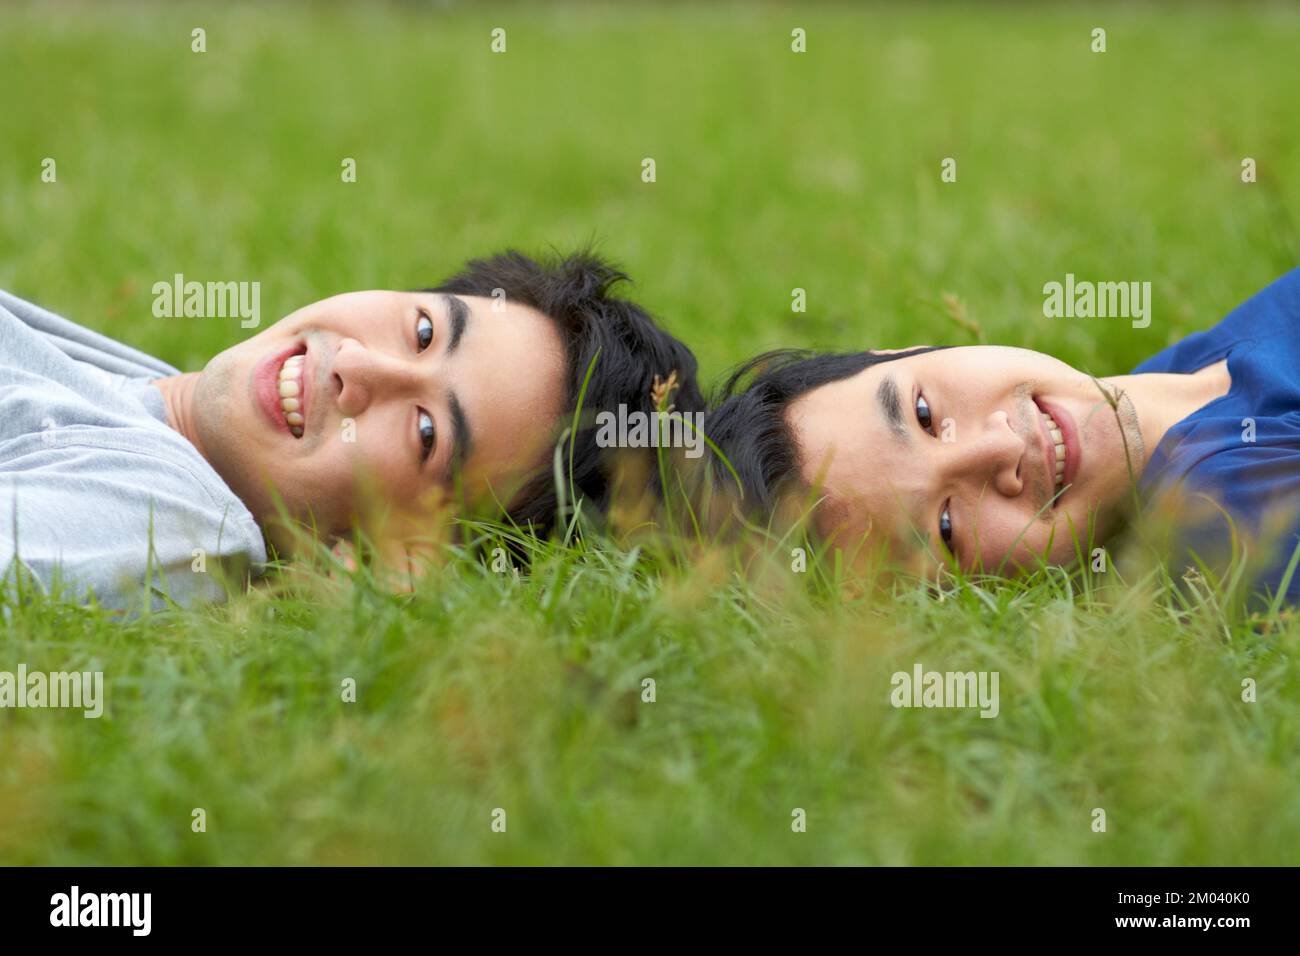 Sharing the same thoughts and dreams. Cute young gay Asian couple smiling together while lying on the grass. Stock Photo